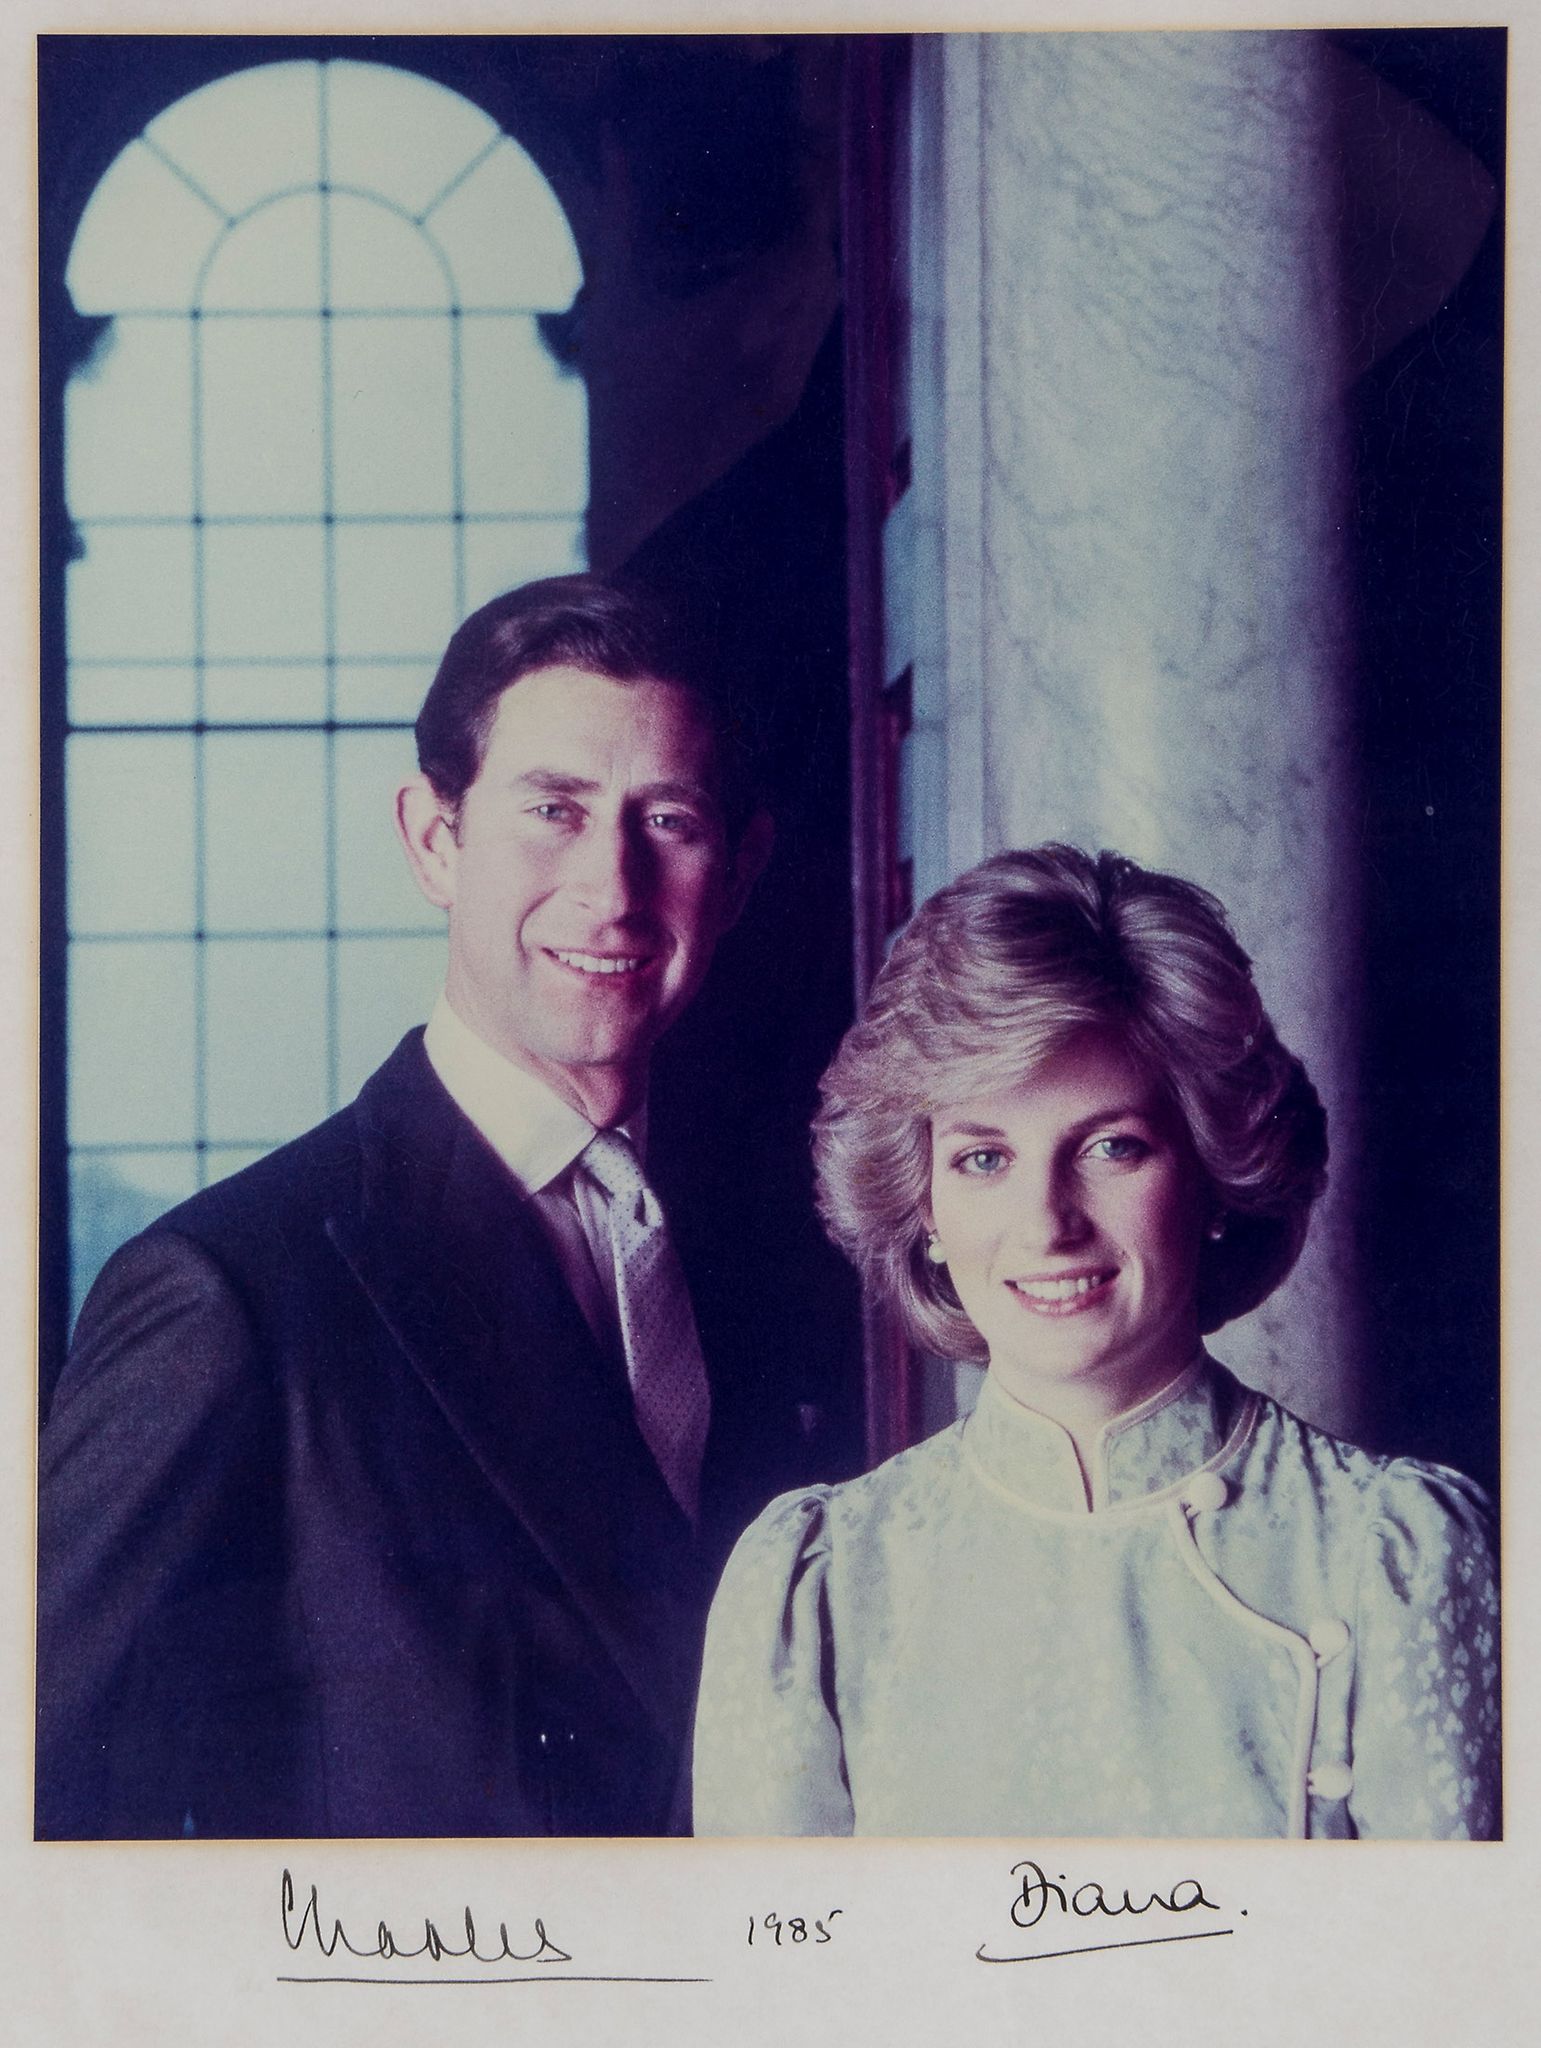 CHARLES & DIANA - Mounted 37.5 x 30cm colour, head and shoulders photograph by Lord... Mounted 37.